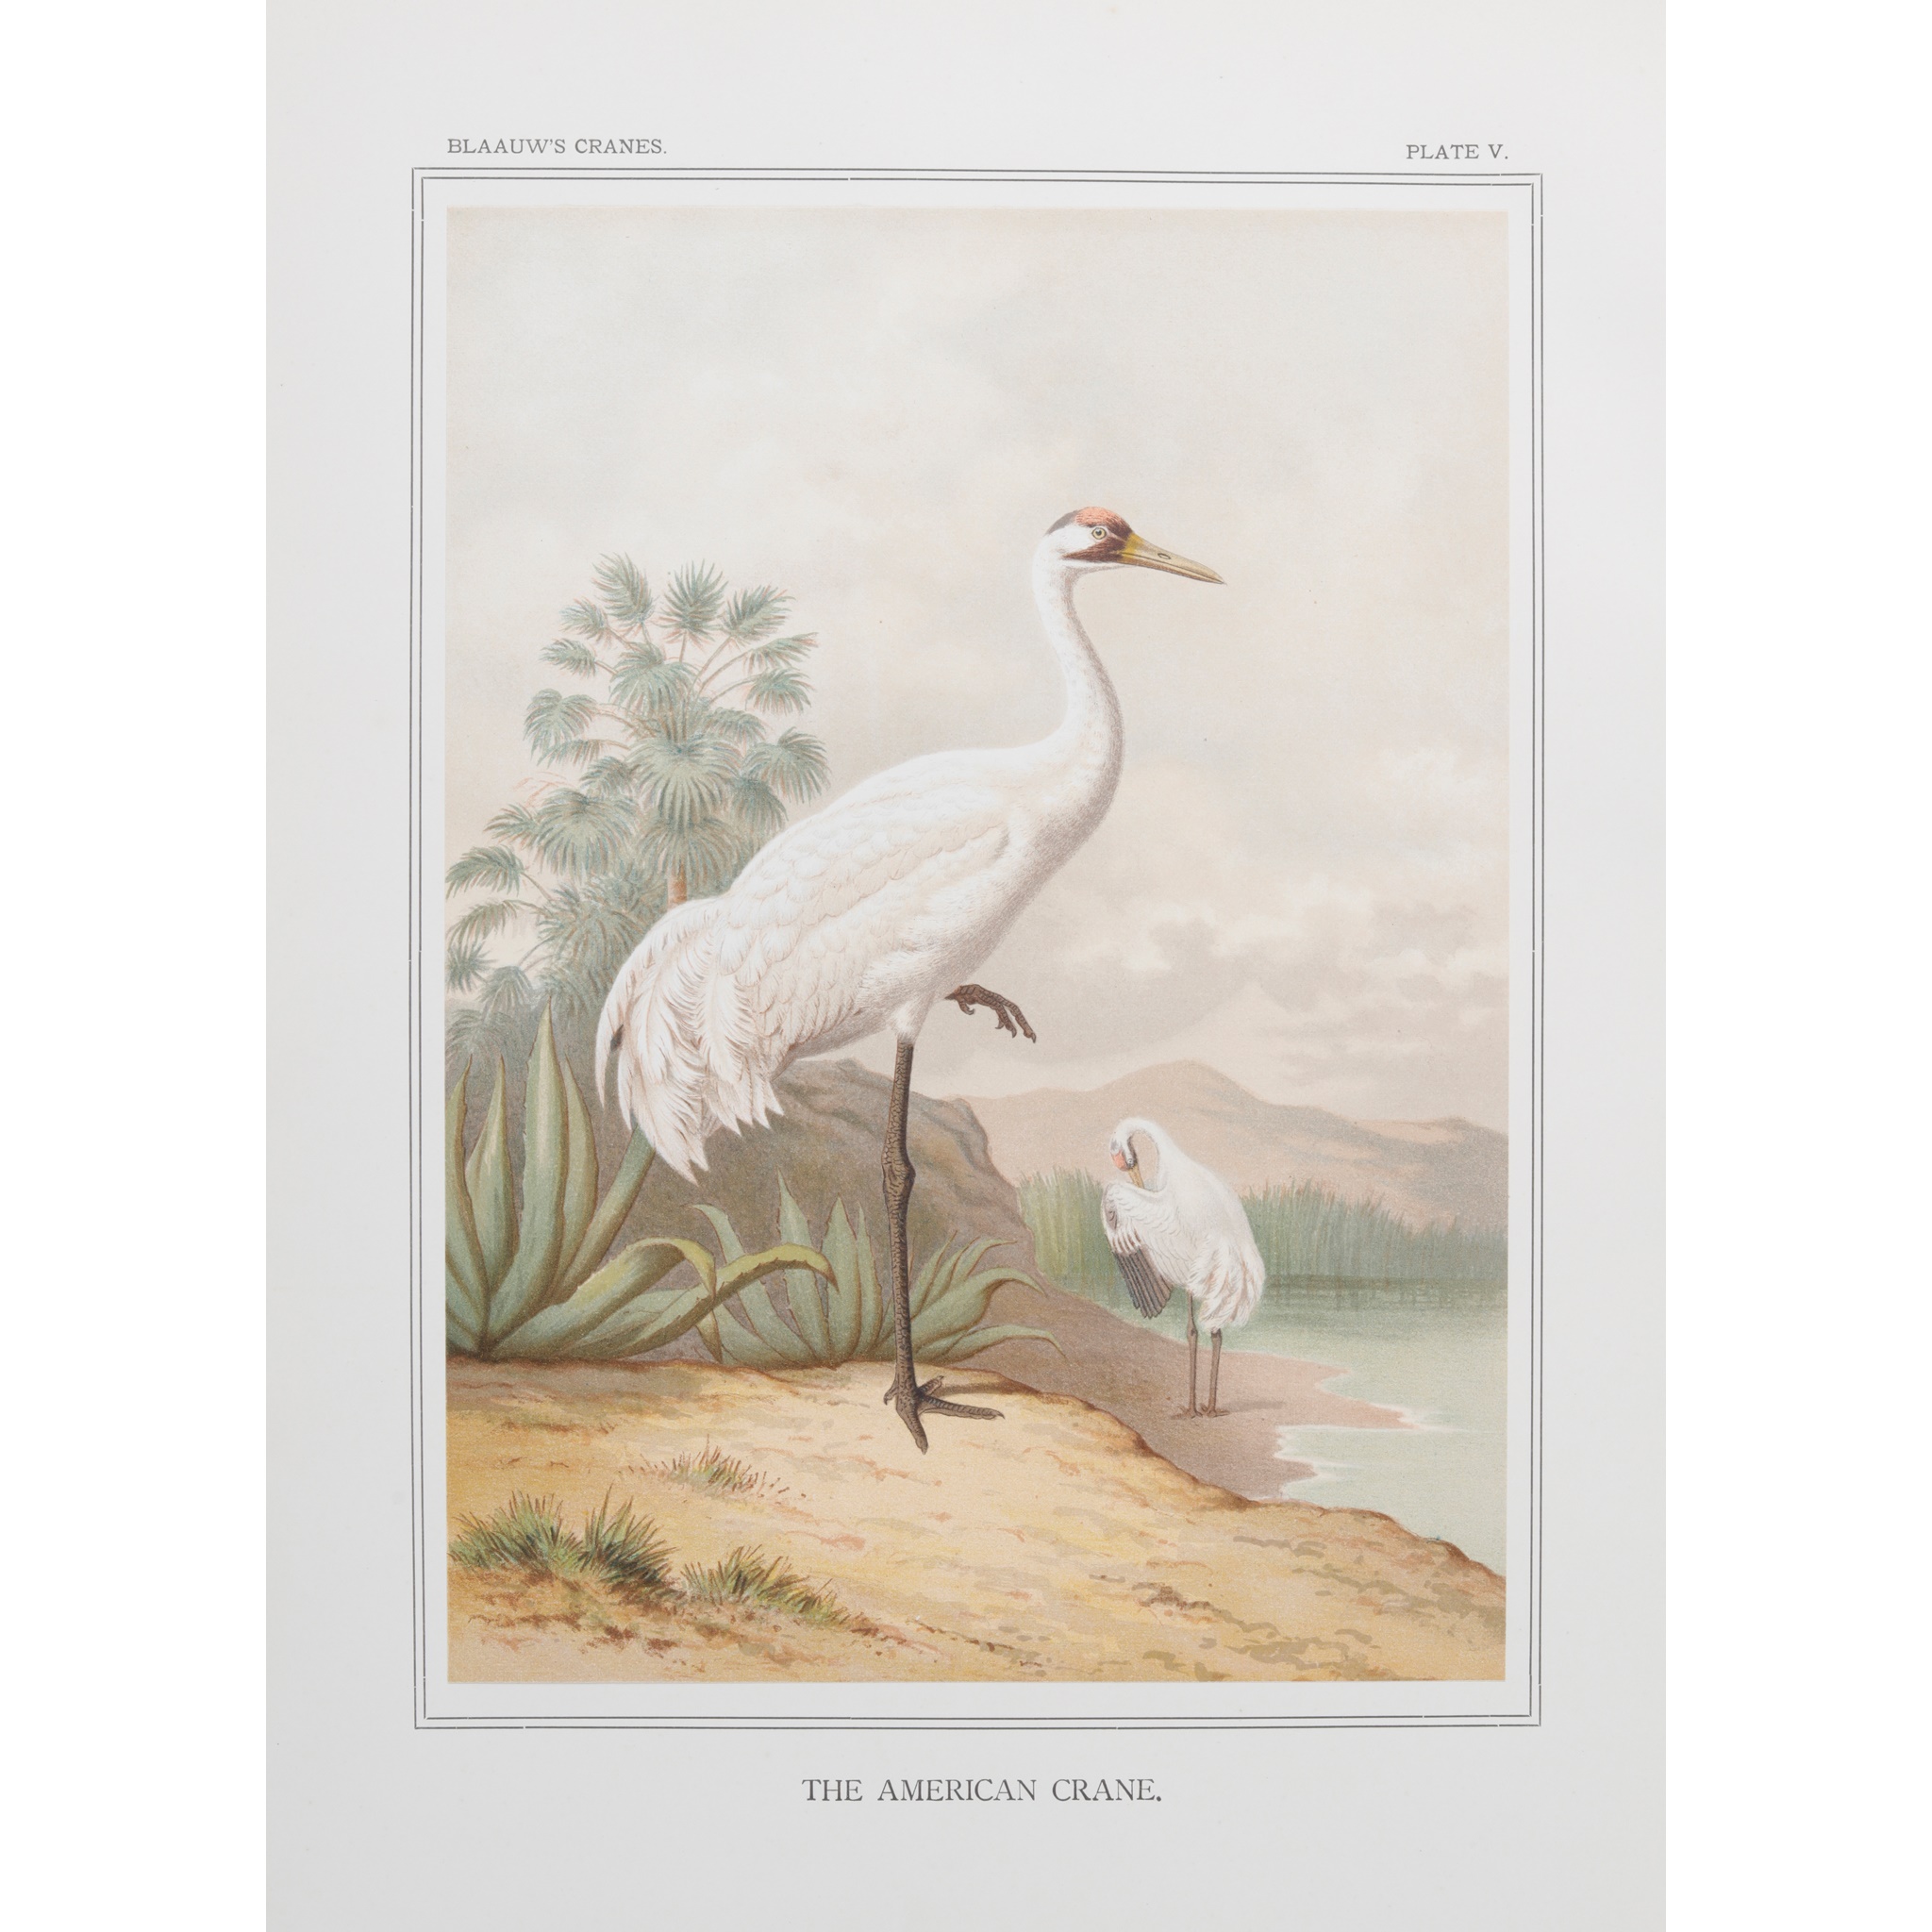 BLAAUW, FRANS ERNST A MONOGRAPH OF THE CRANES